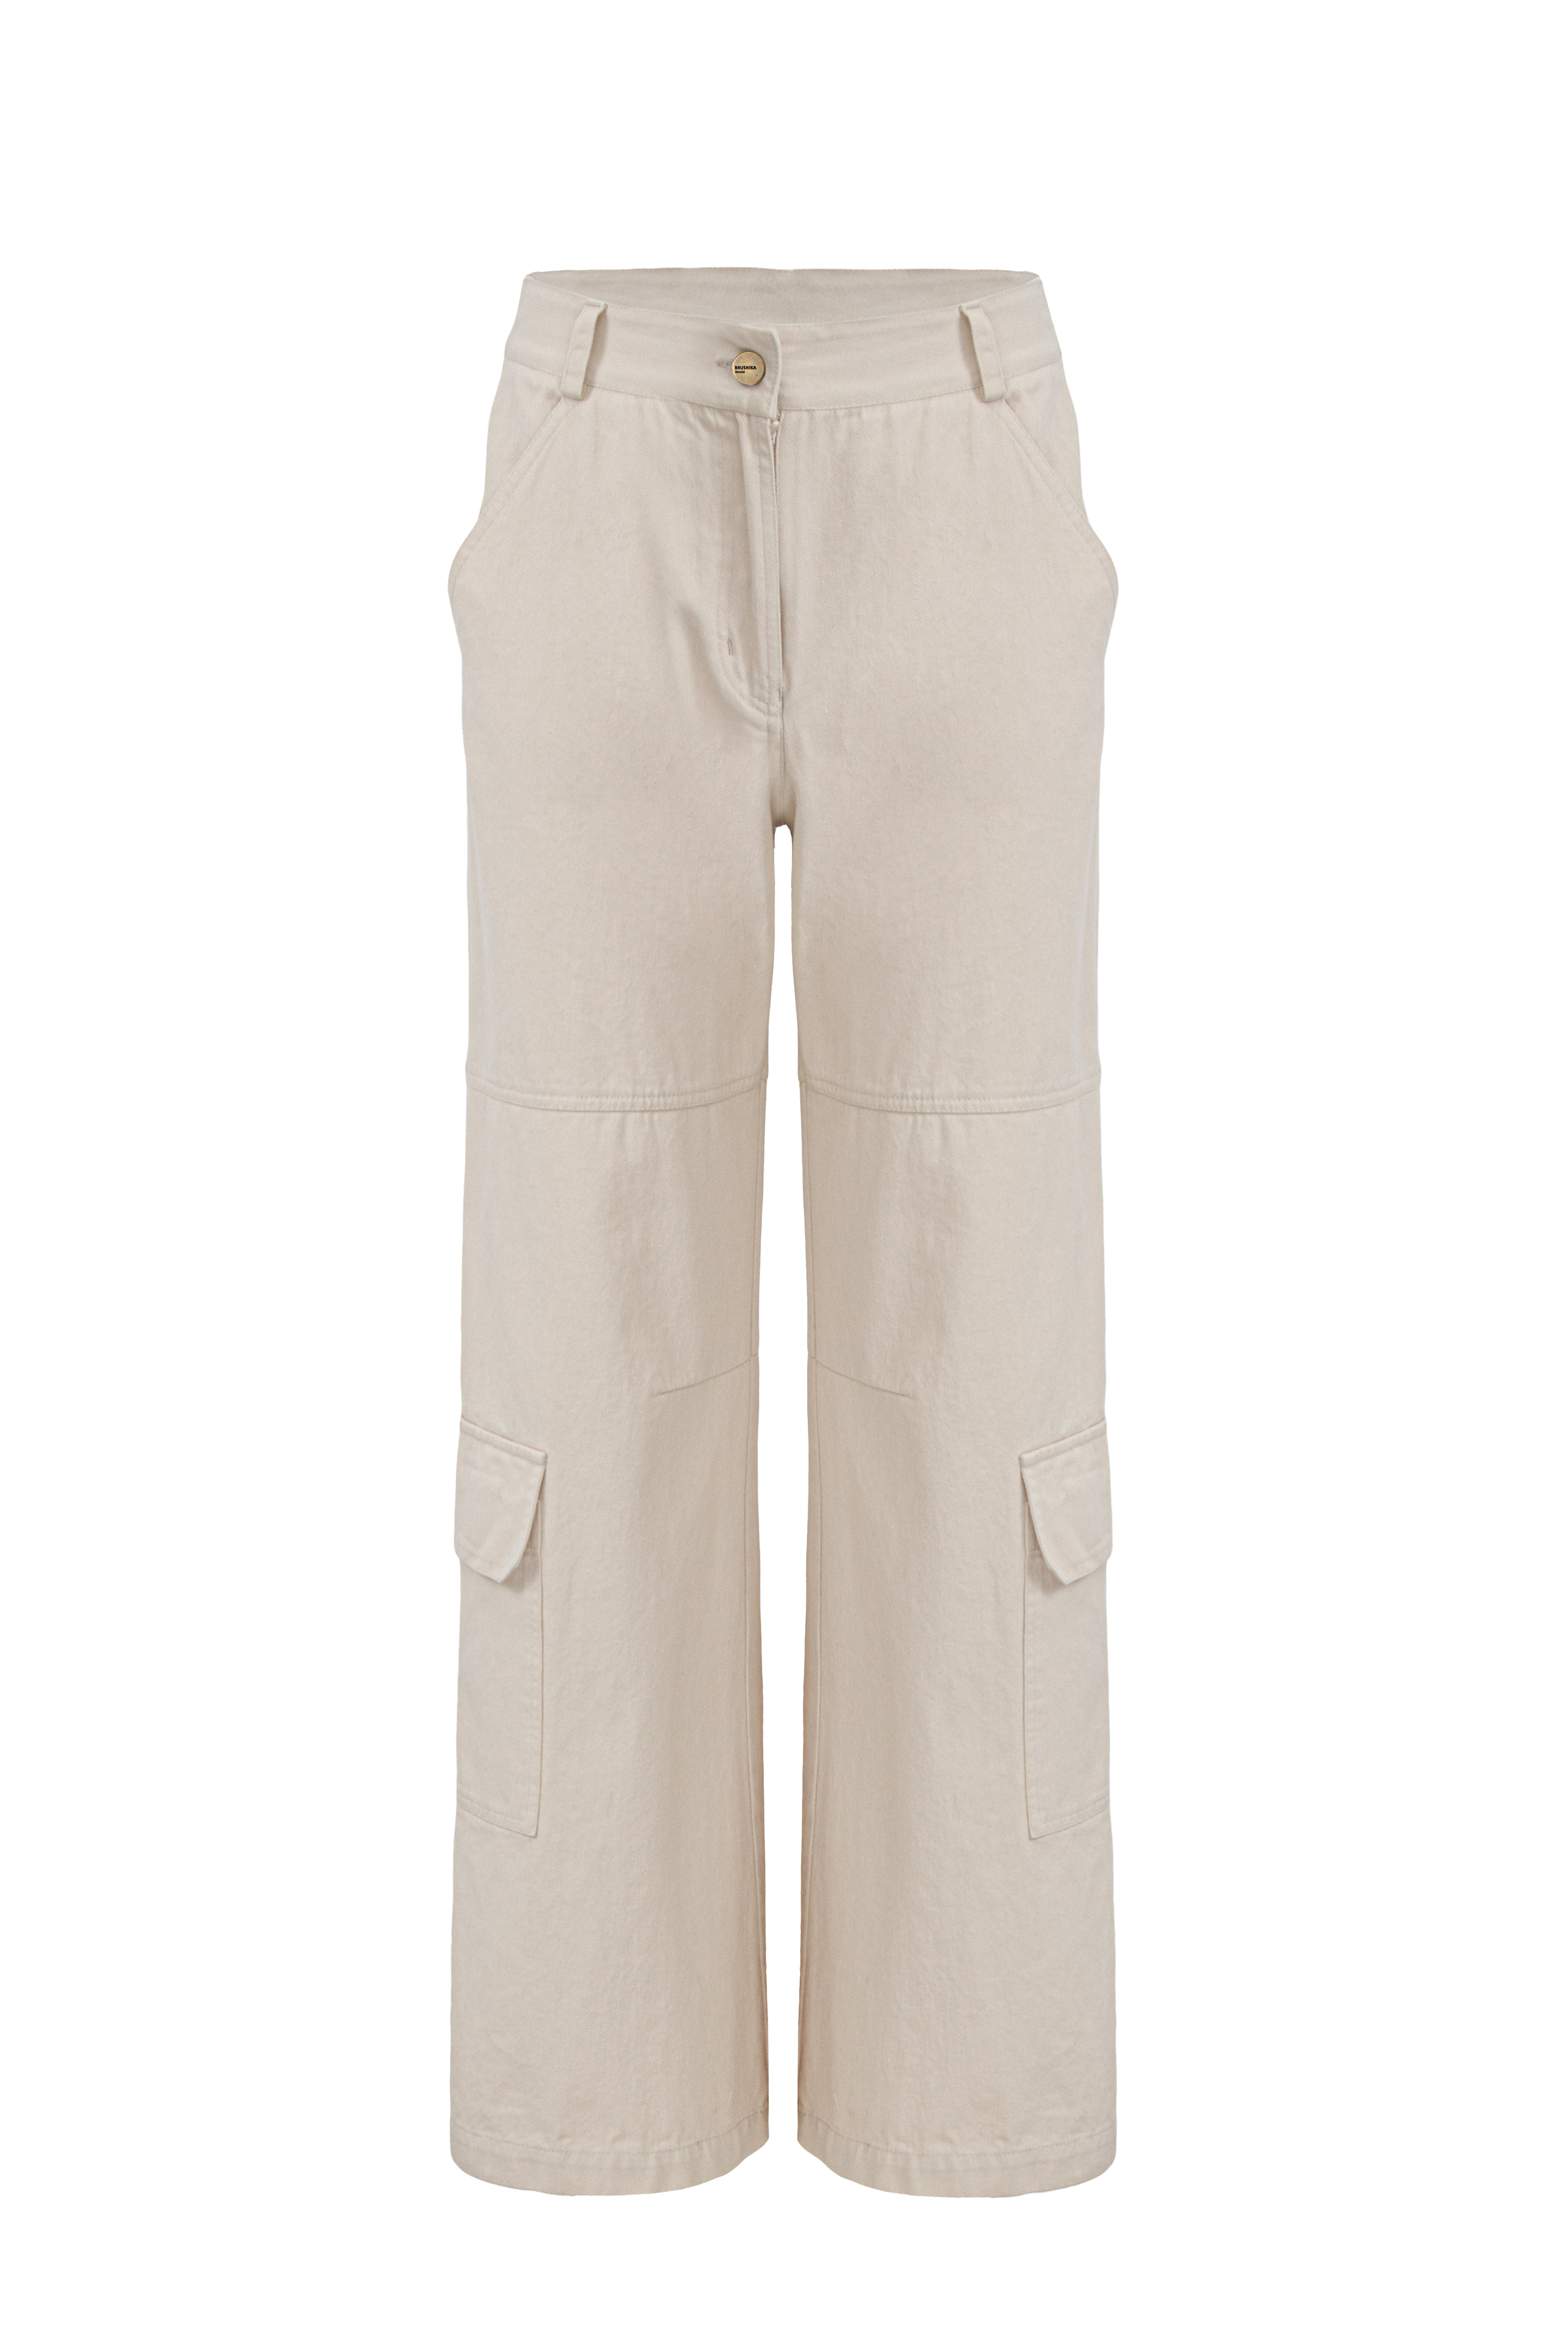 Trousers 3974-45 Beige from BRUSNiKA